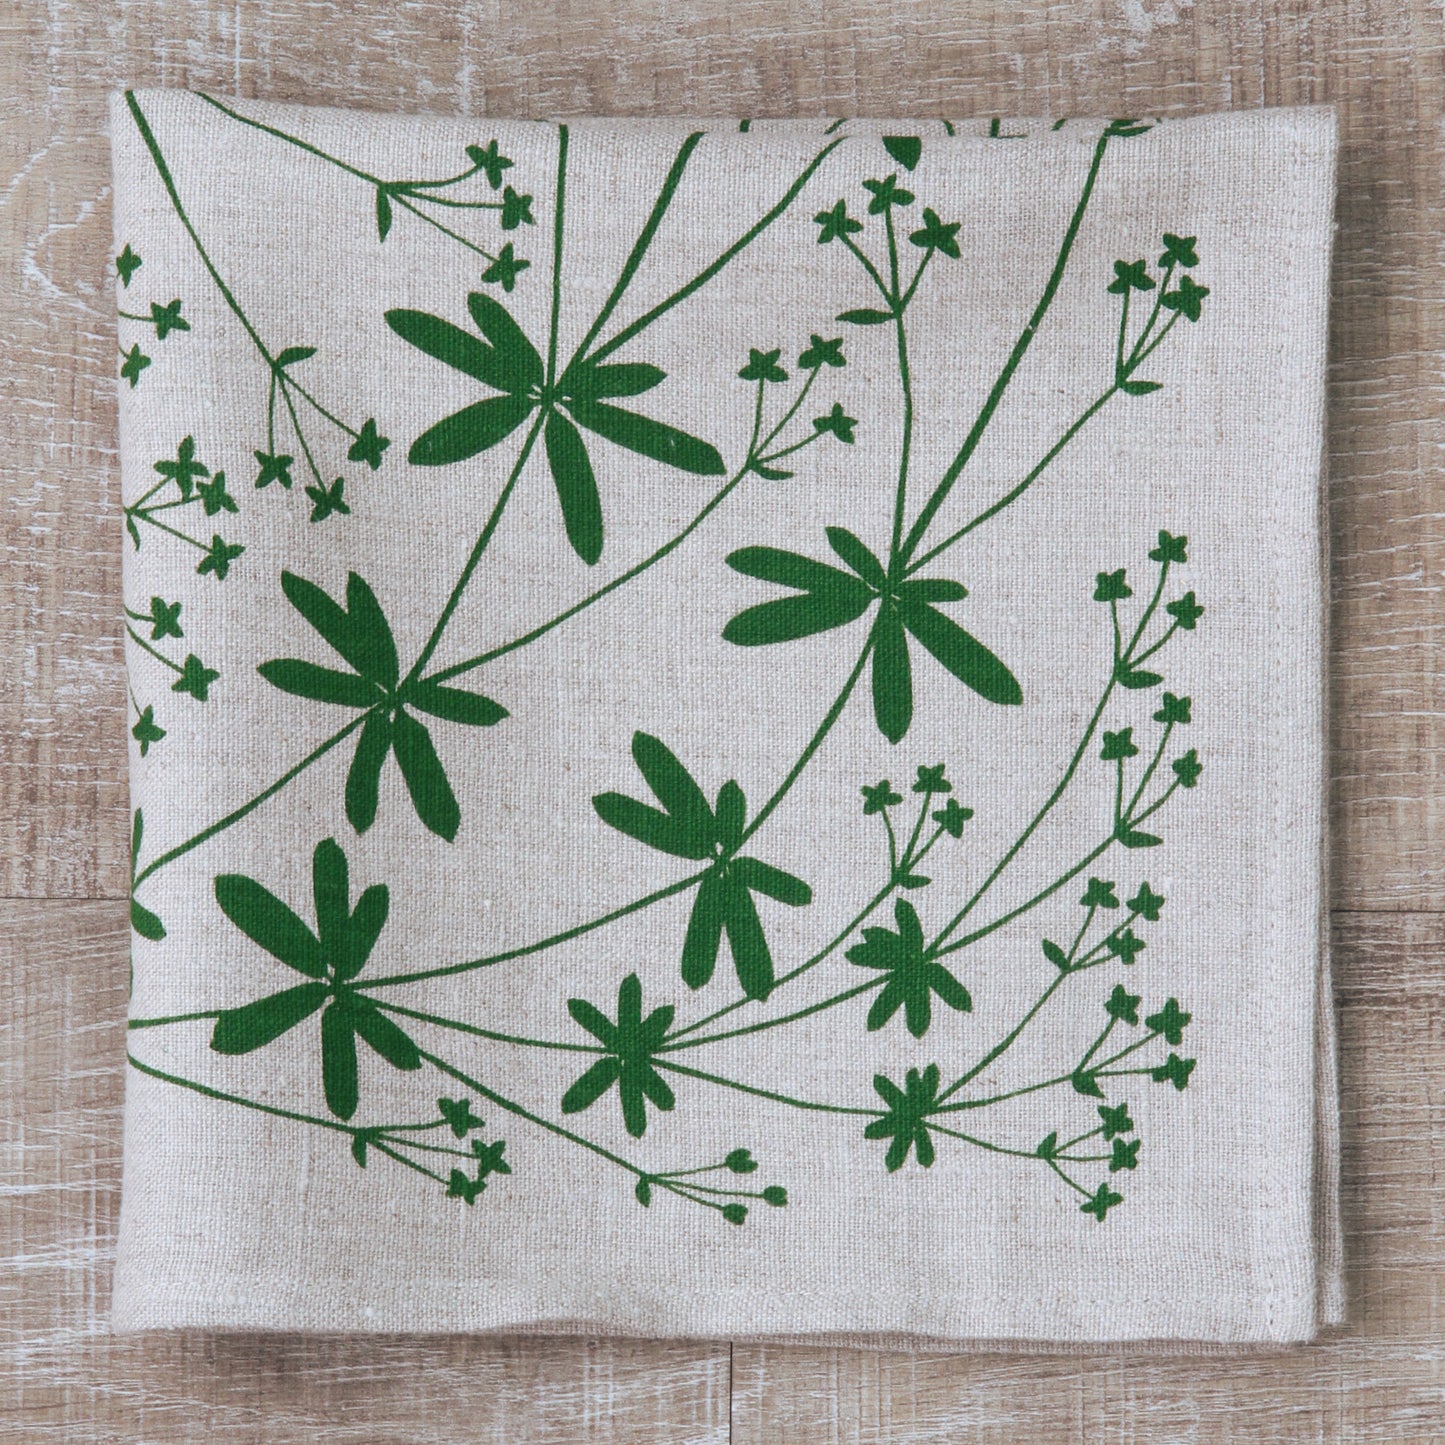 Bedstraw Napkin in Pine Green on Natural Flax Linen